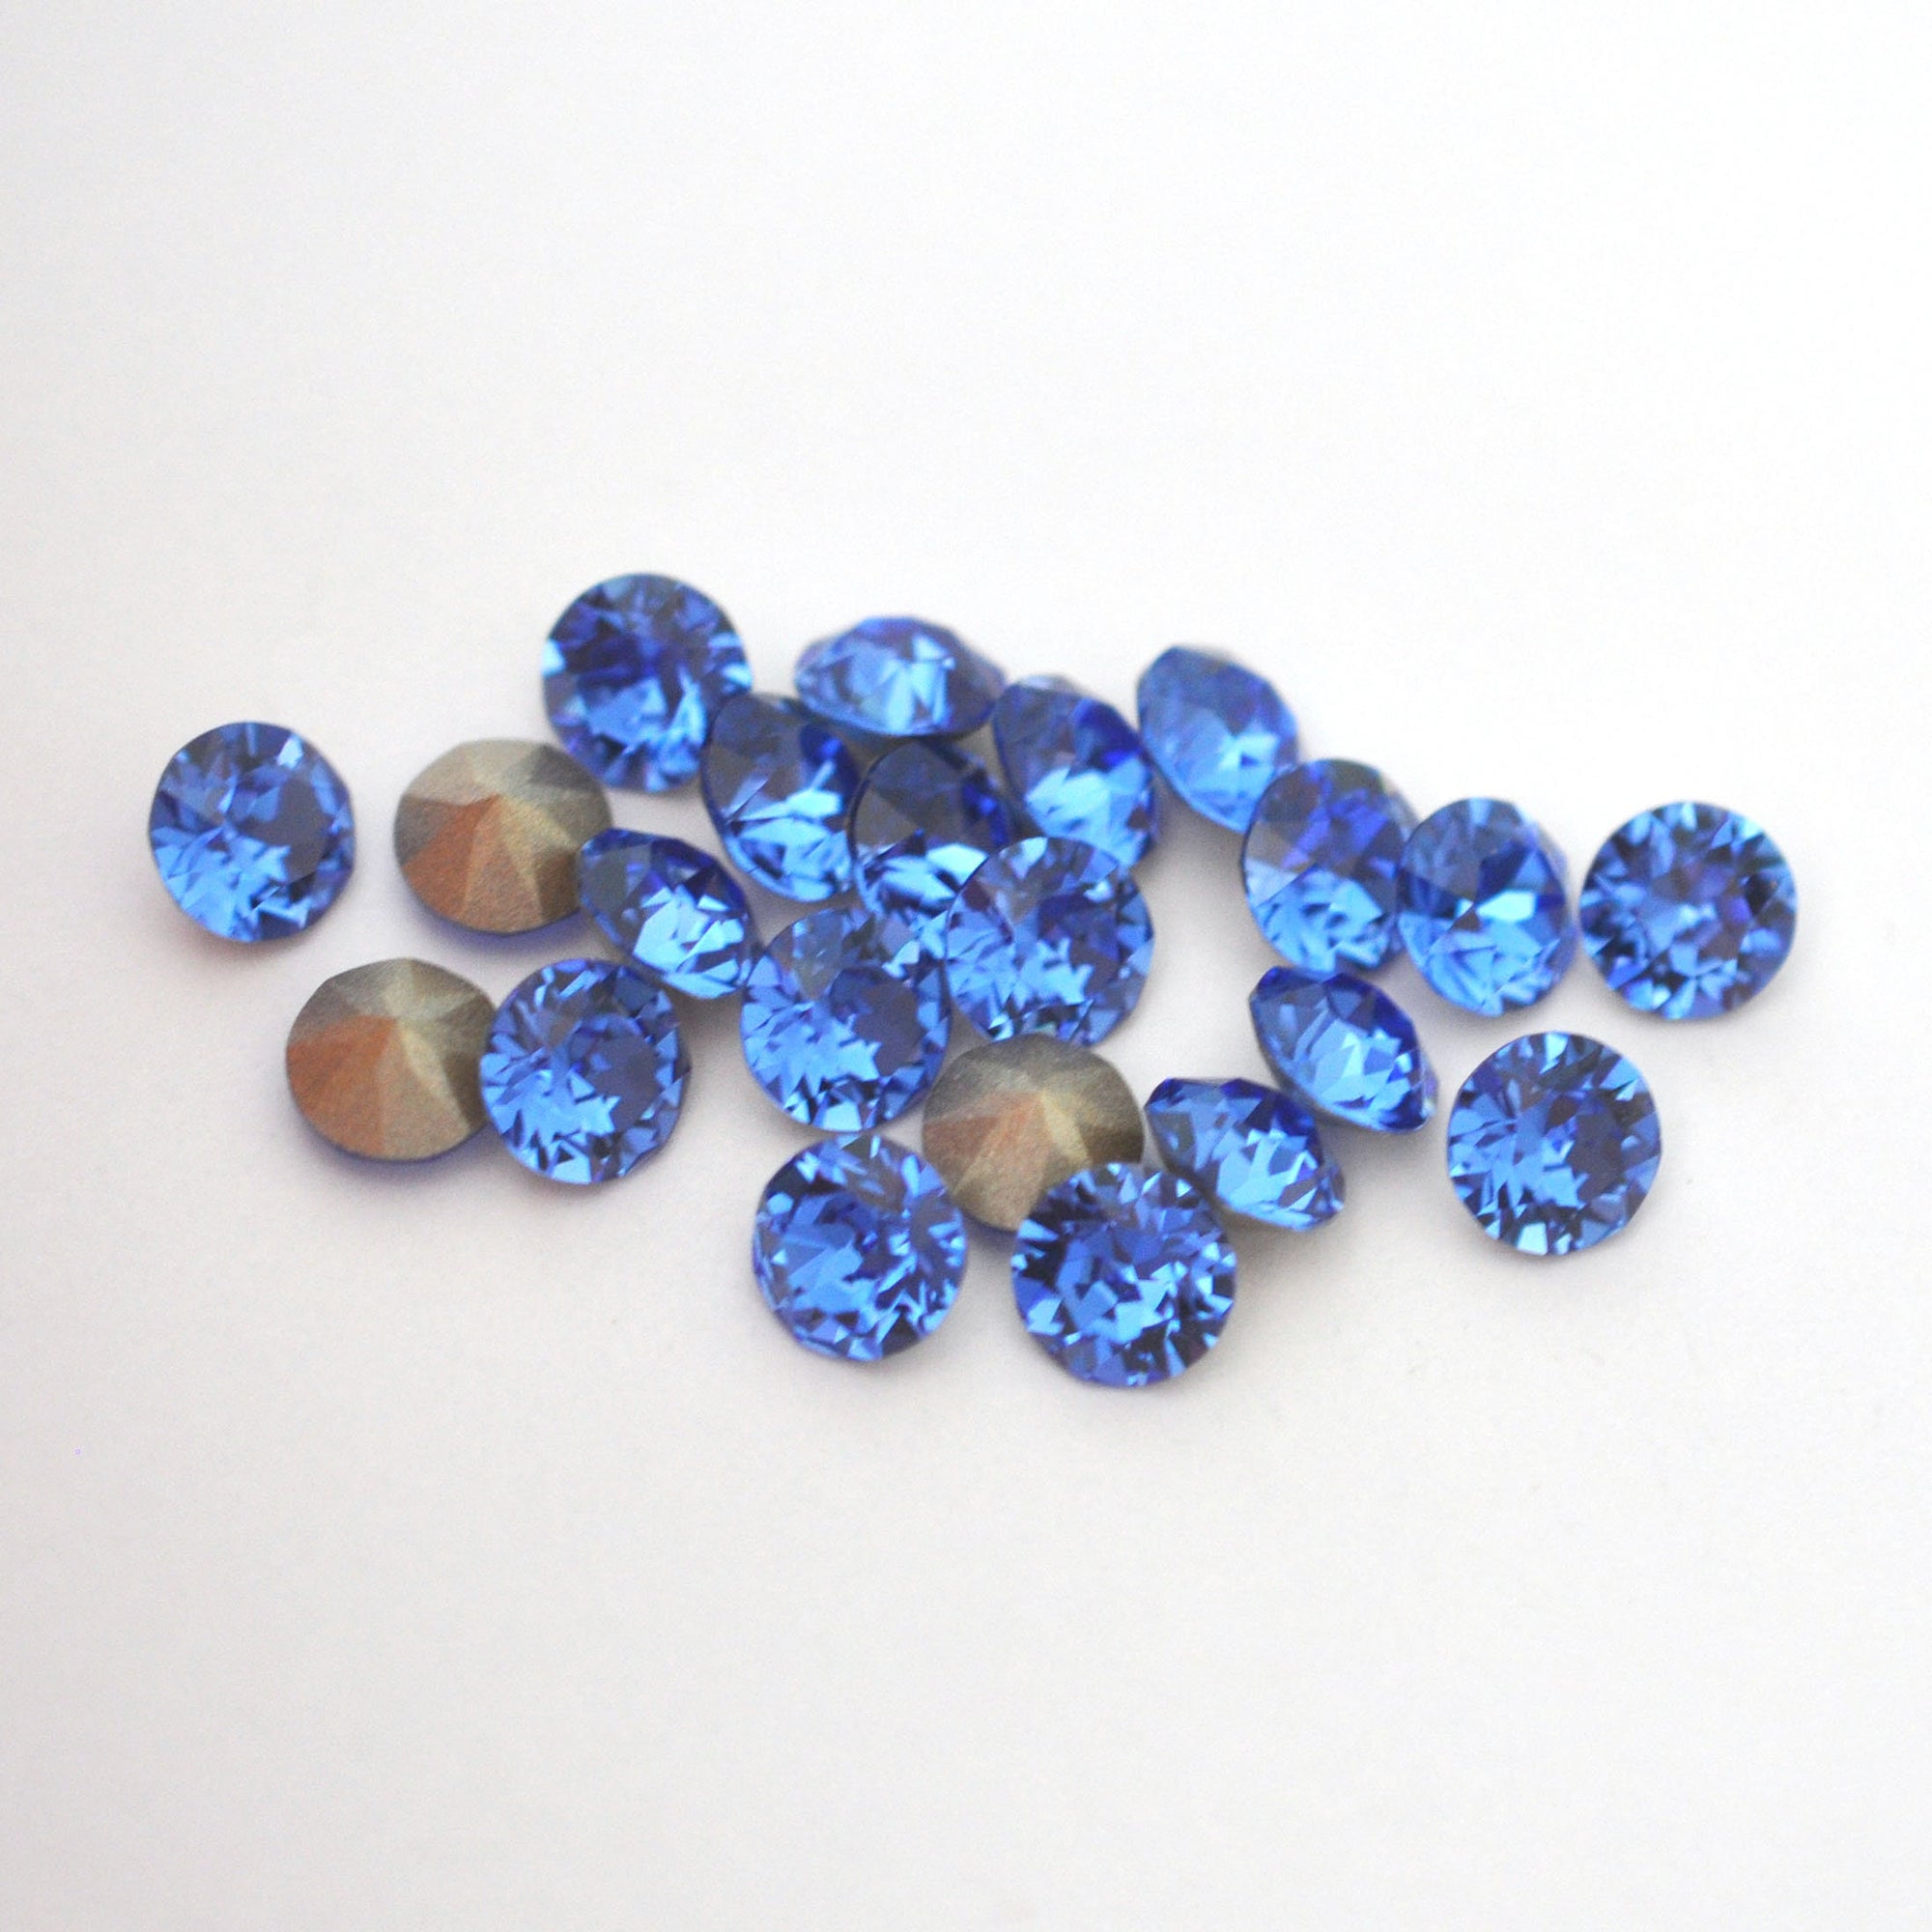 Sapphire 1088 Pointed Back Chaton Barton Crystal 29ss, 6mm